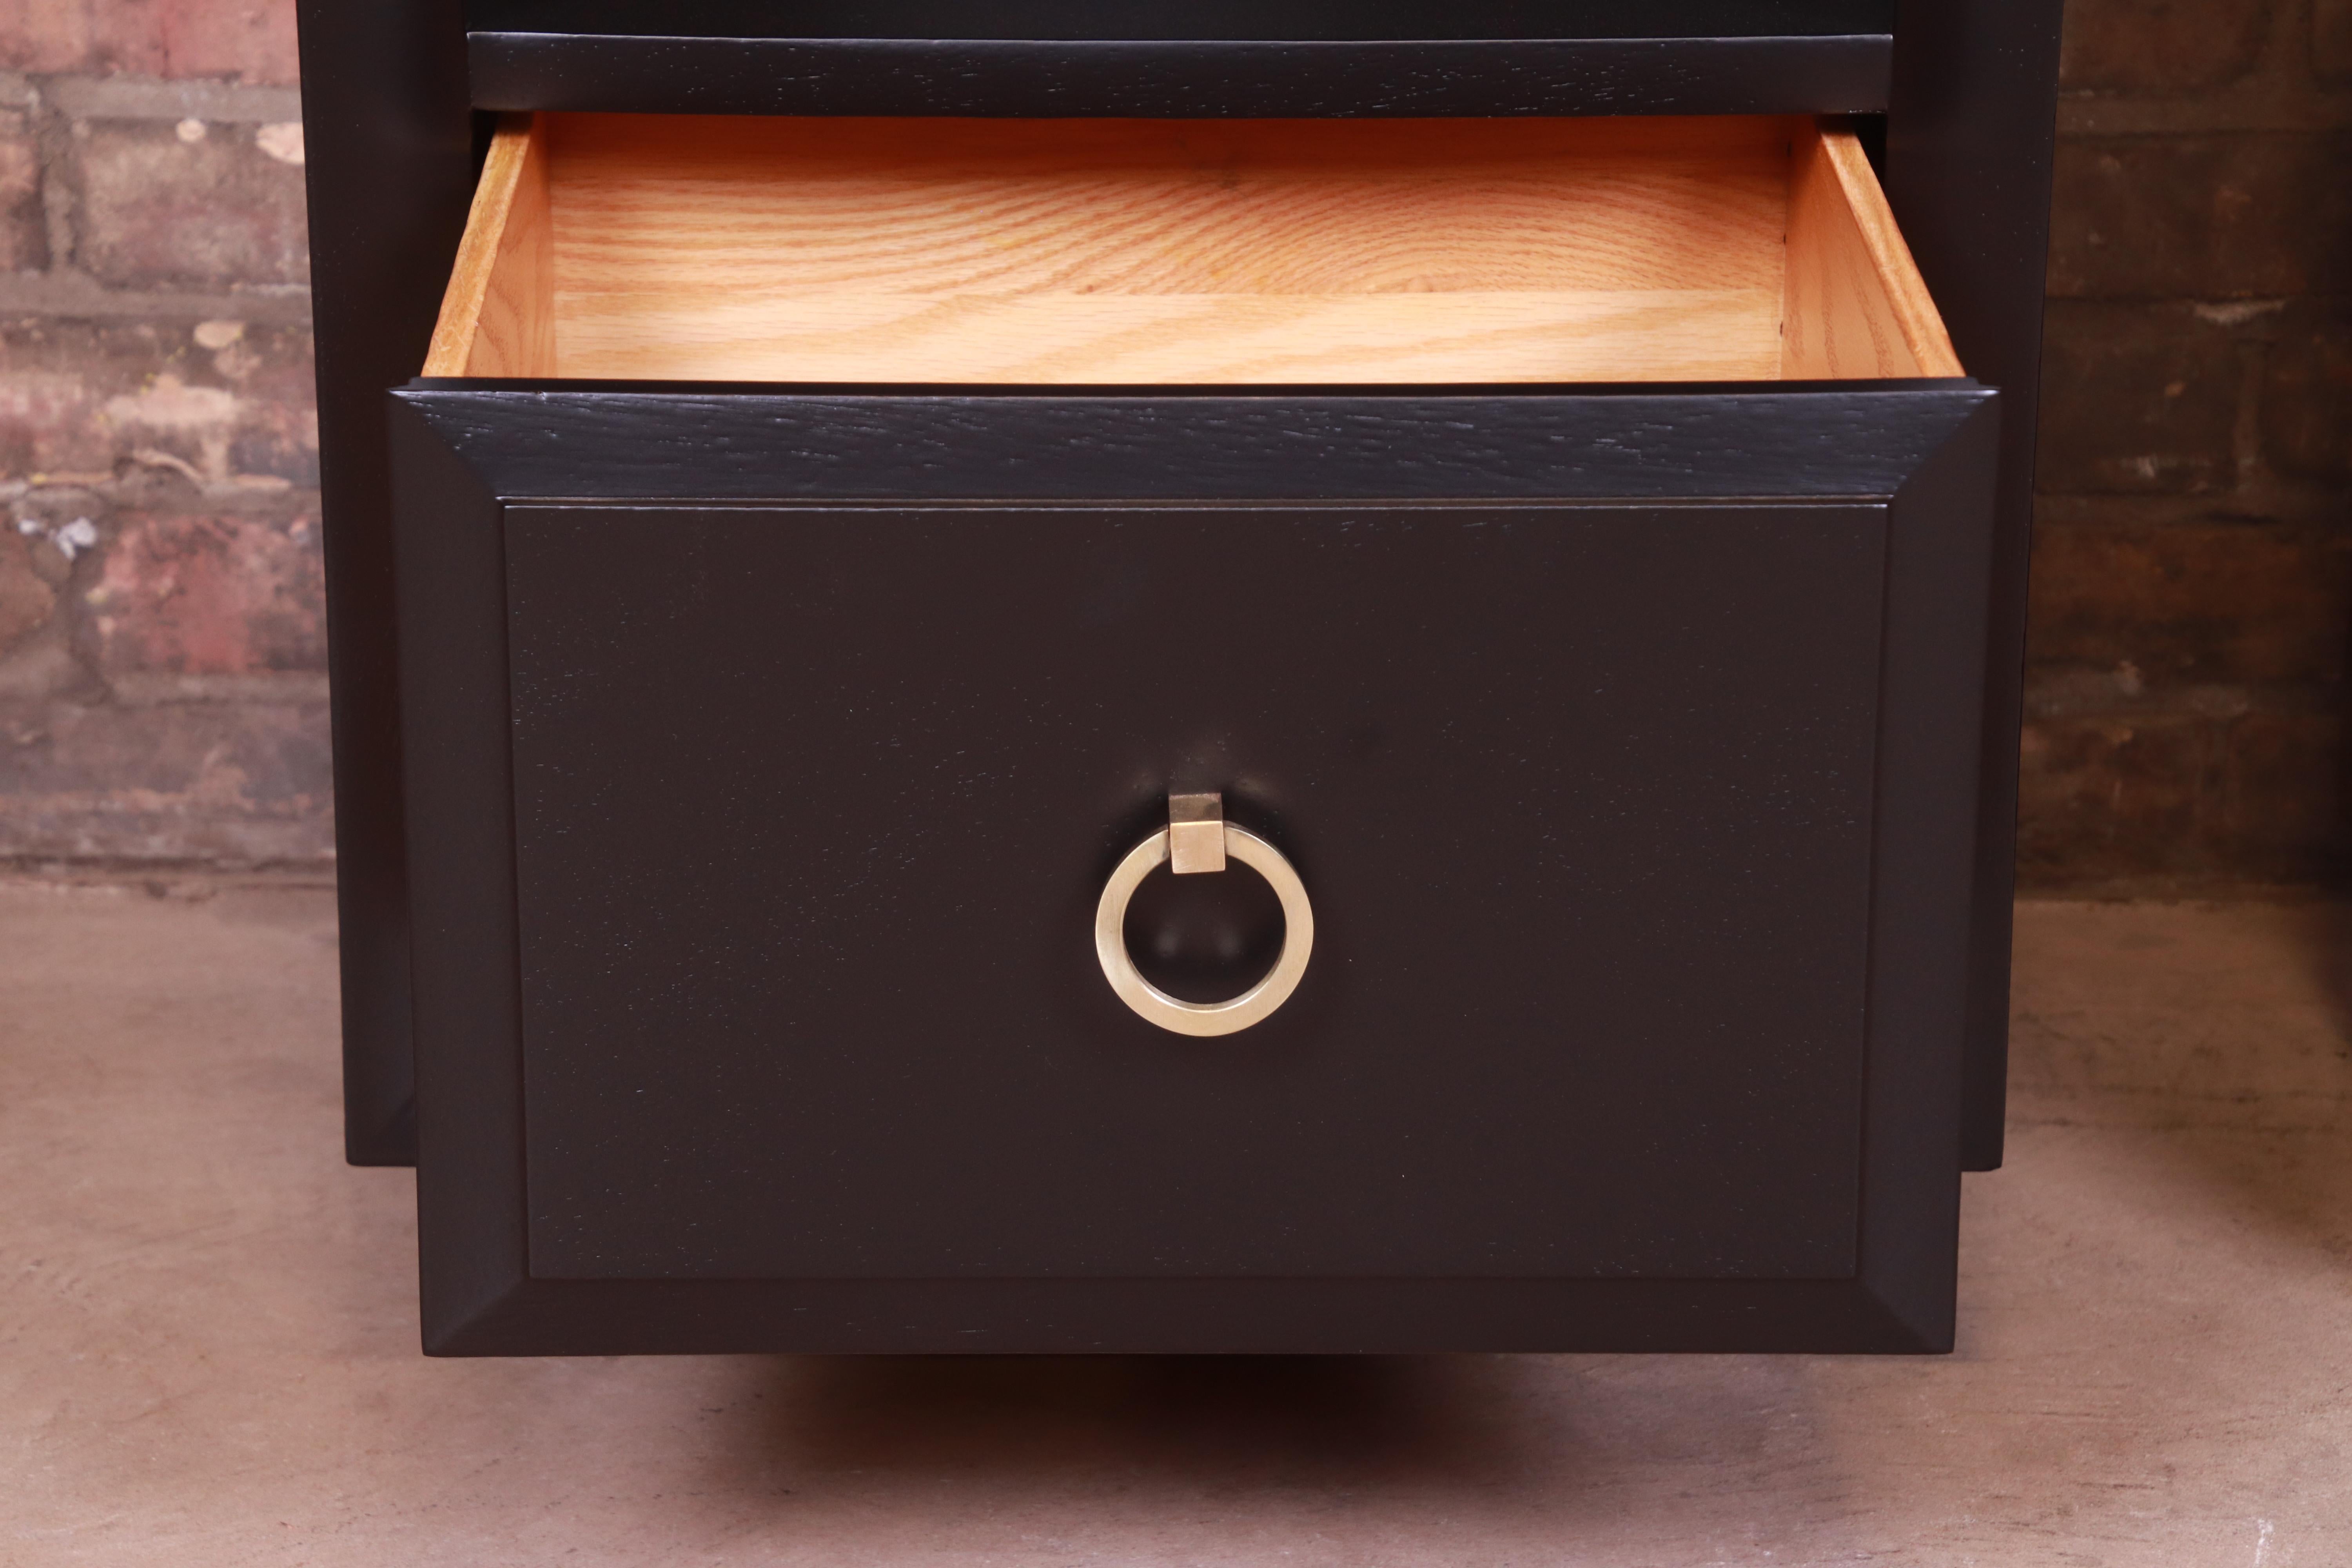 Robsjohn-Gibbings for Widdicomb Black Lacquered Nightstands, Newly Refinished For Sale 2